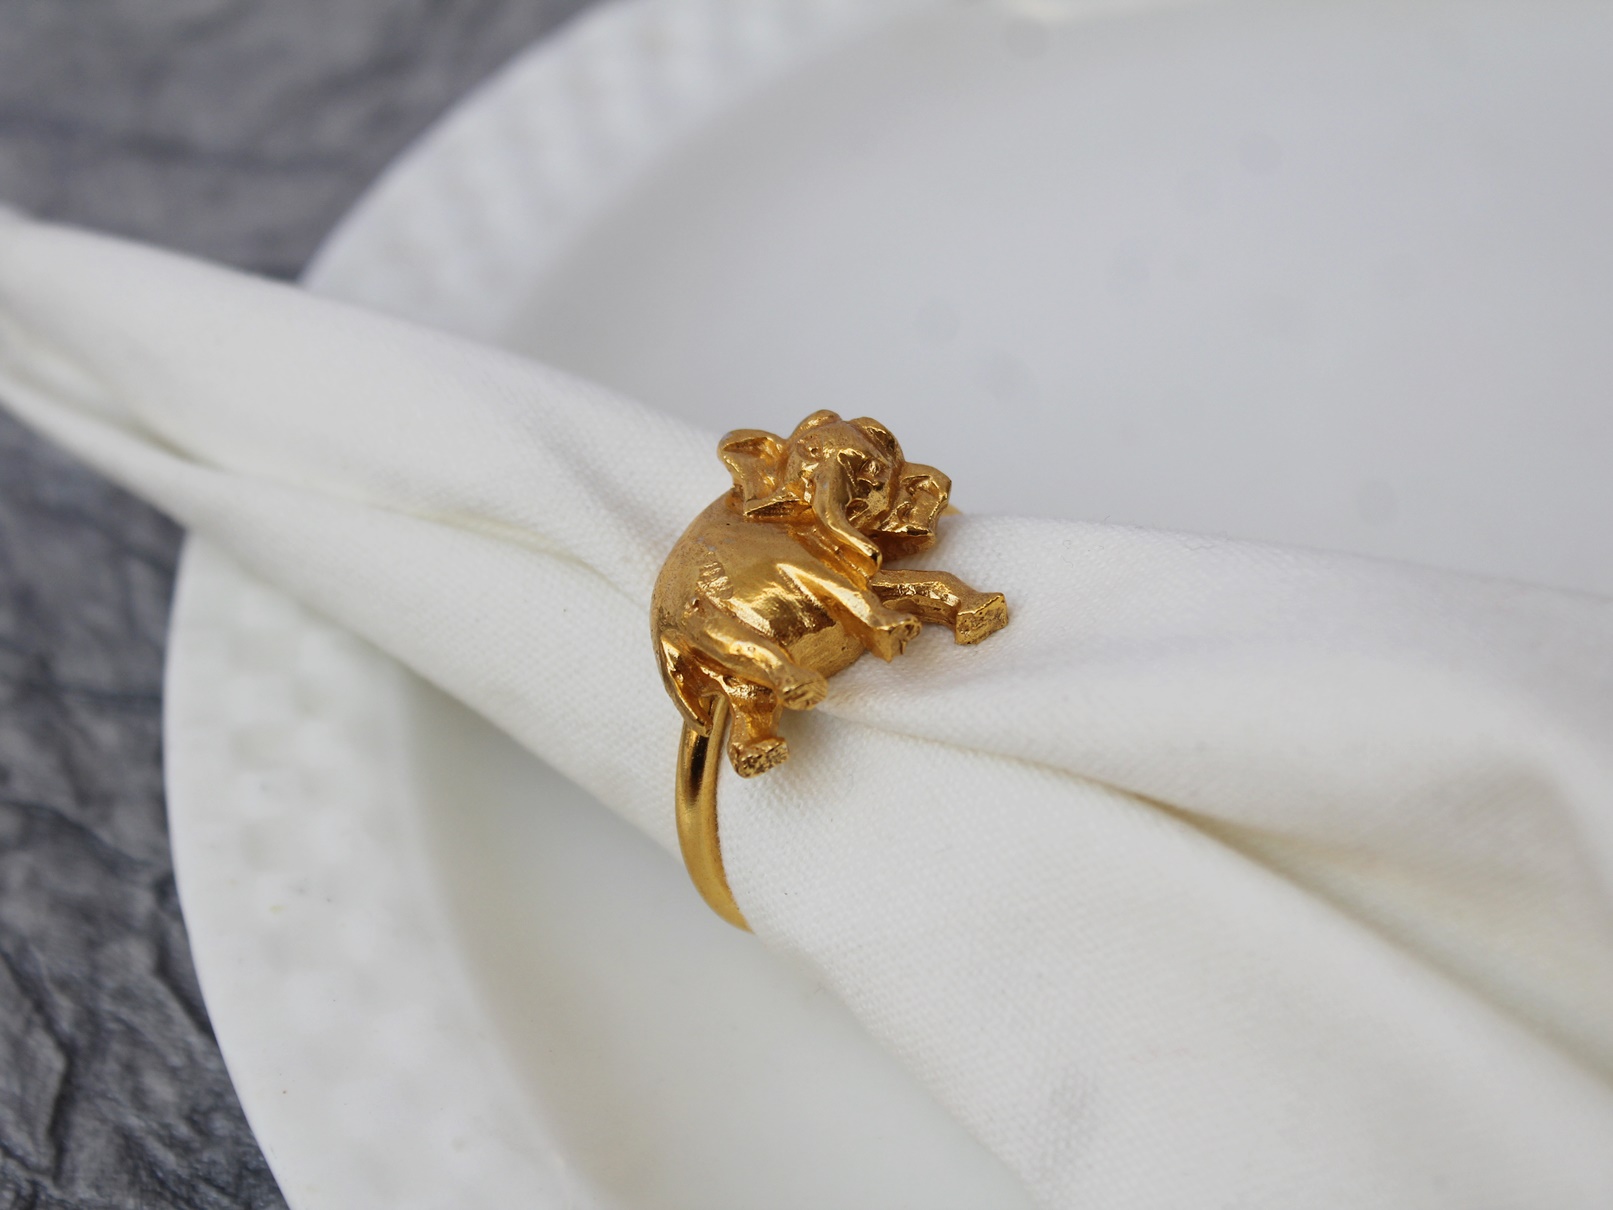 Elephant Calf textured Brass Napkin Holder Ring (Gold Plated) - SET OF 4